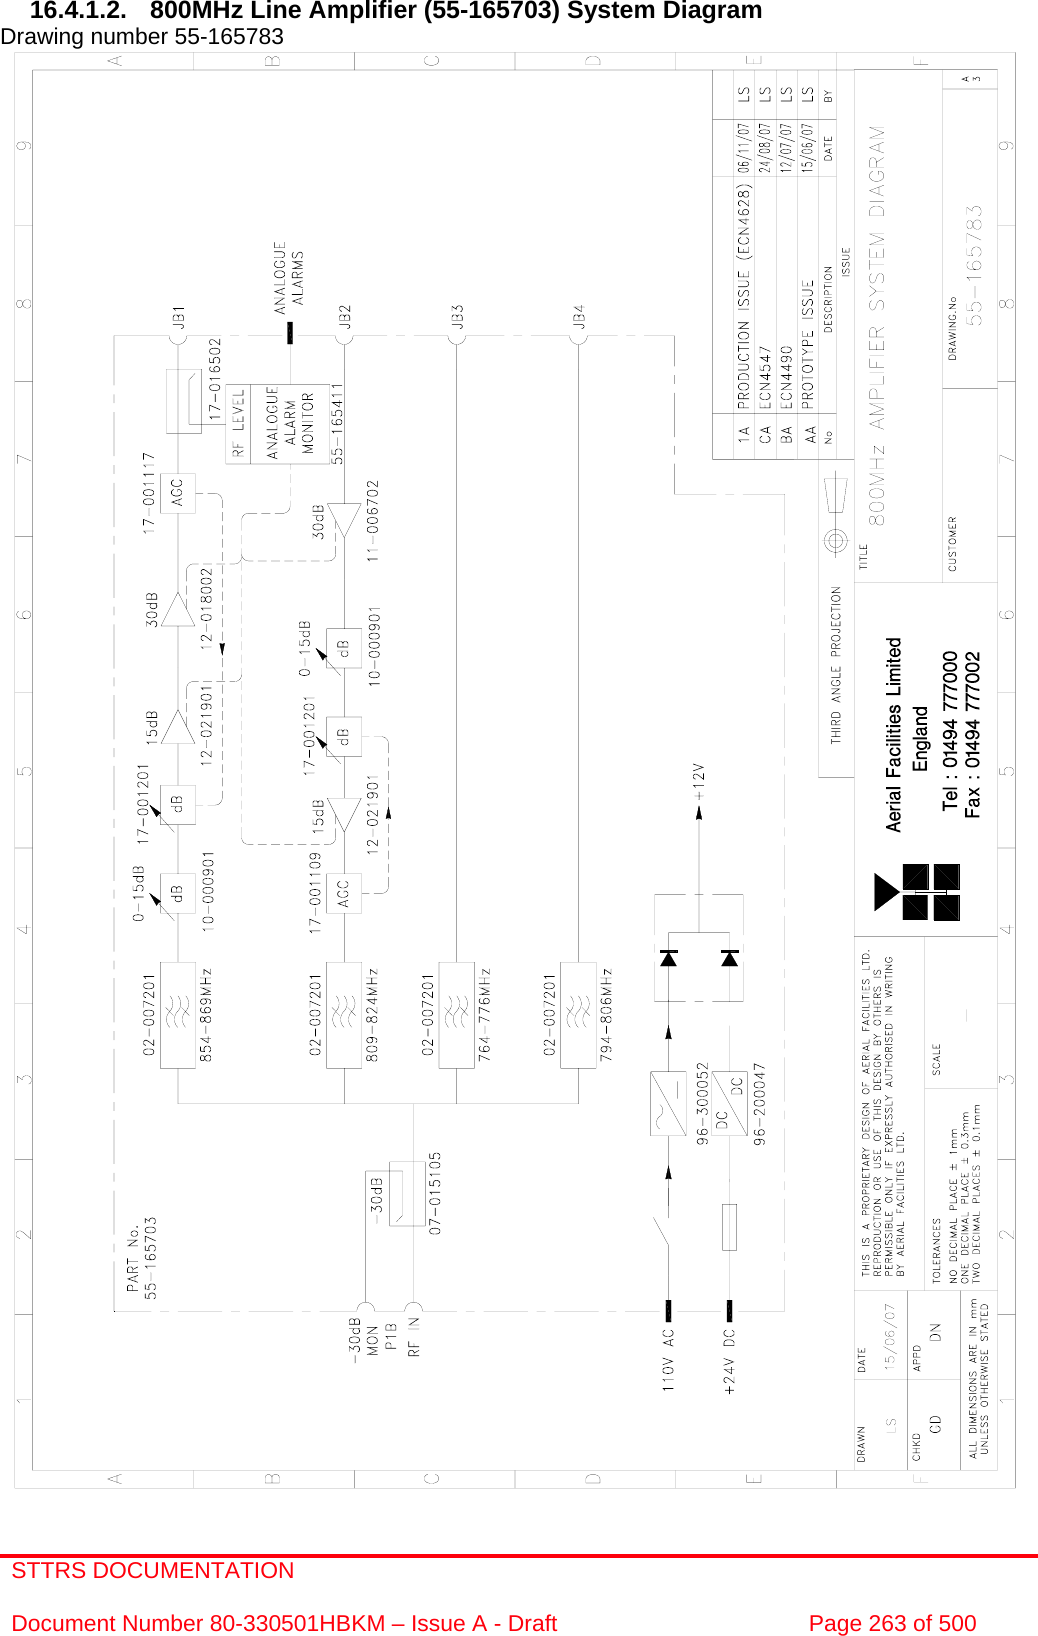 STTRS DOCUMENTATION  Document Number 80-330501HBKM – Issue A - Draft  Page 263 of 500   16.4.1.2.  800MHz Line Amplifier (55-165703) System Diagram  Drawing number 55-165783                                                        